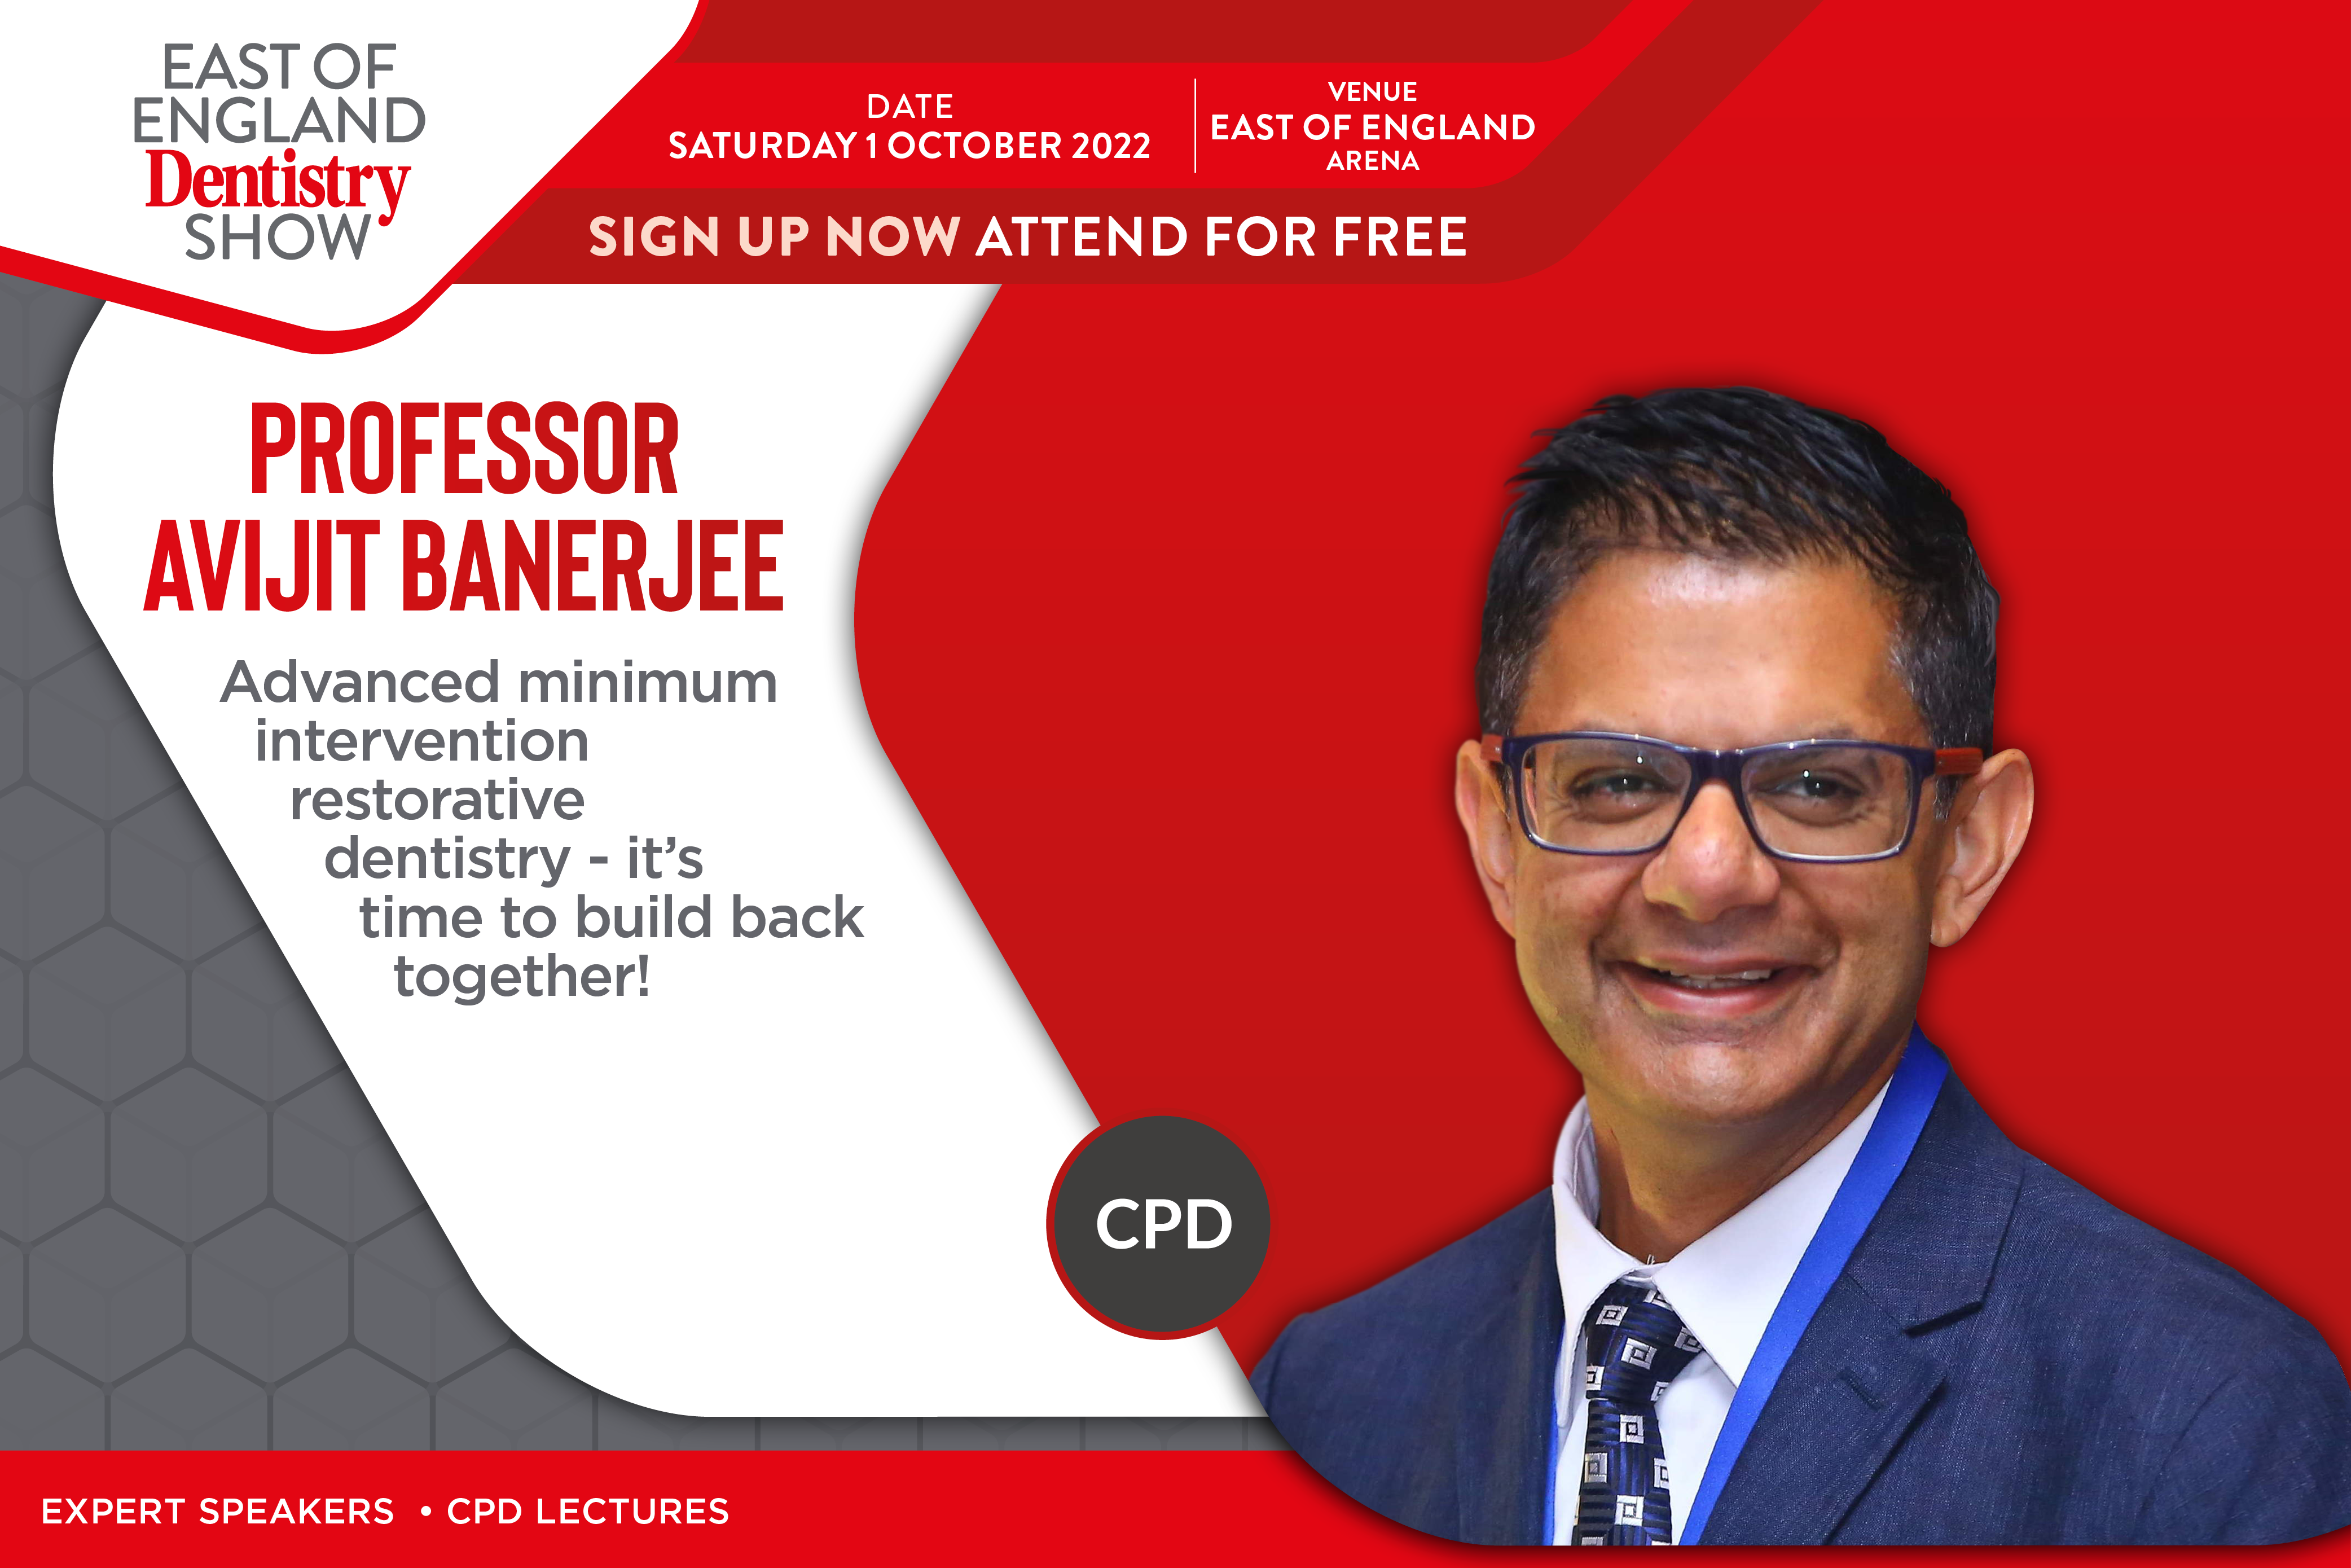 East of England Dentistry Show – your chance to hear from Professor Avijit Banerjee